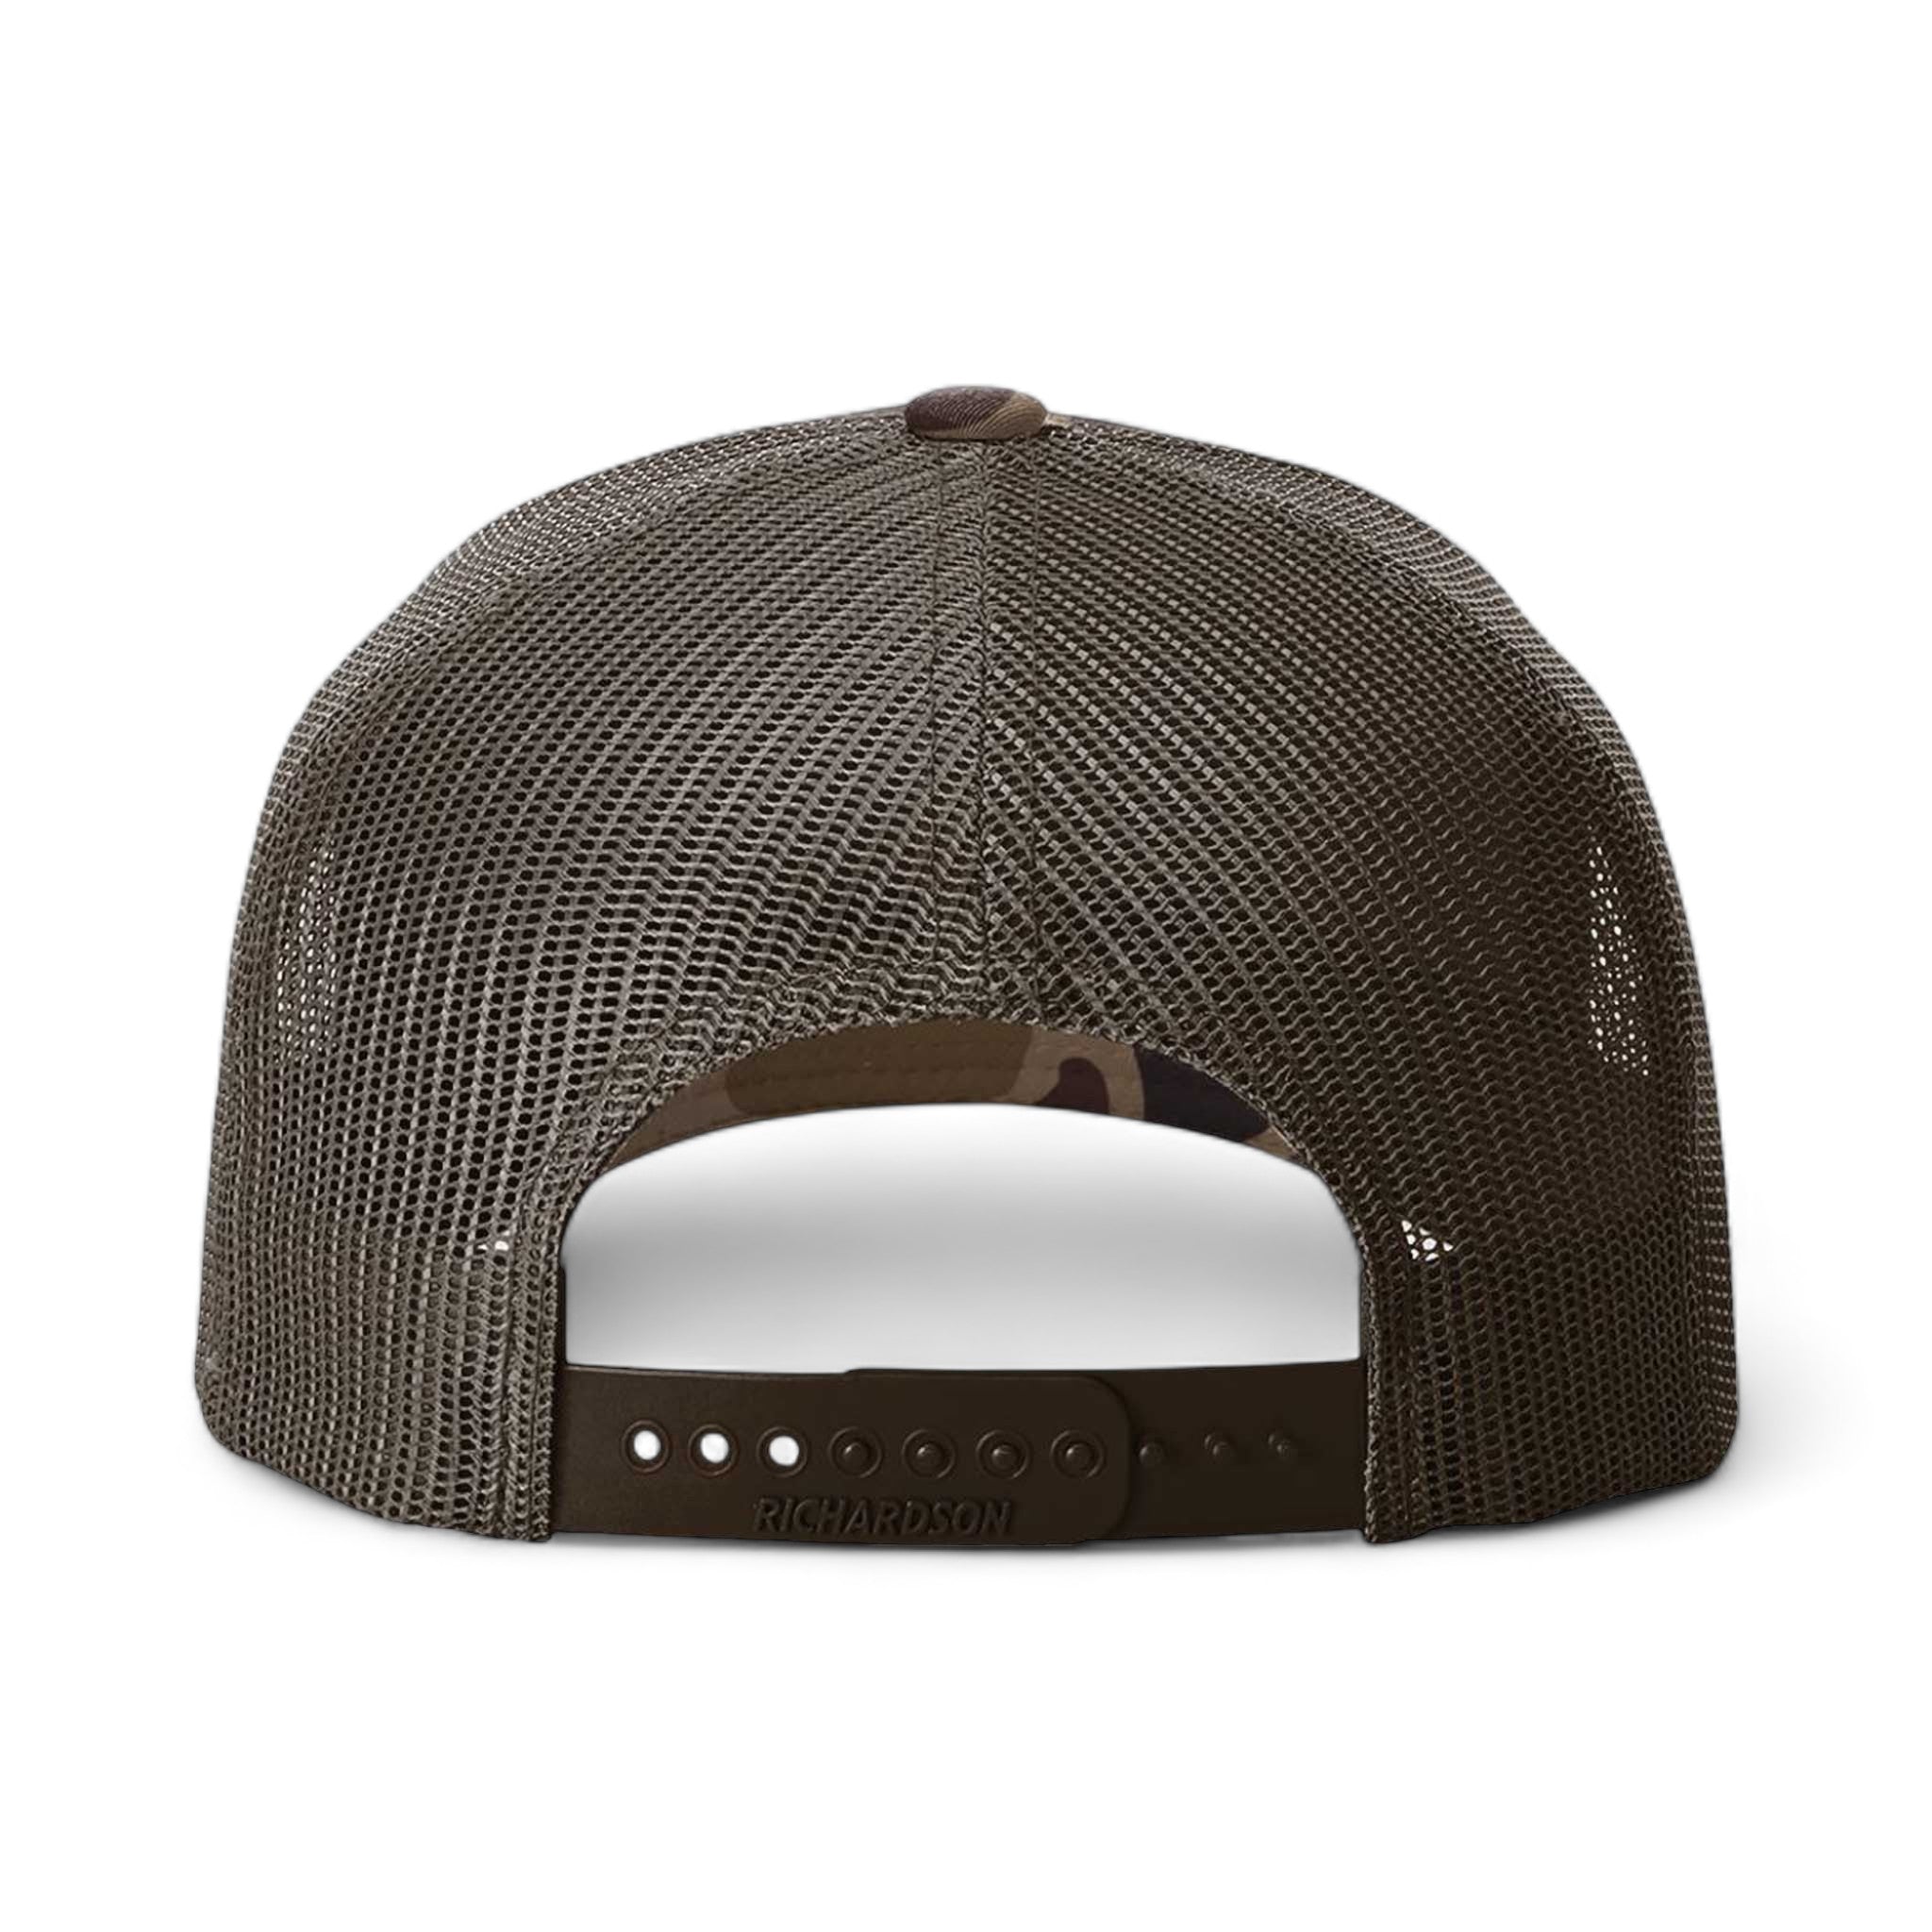 Back view of Richardson 112PFP custom hat in bark duck camo and brown